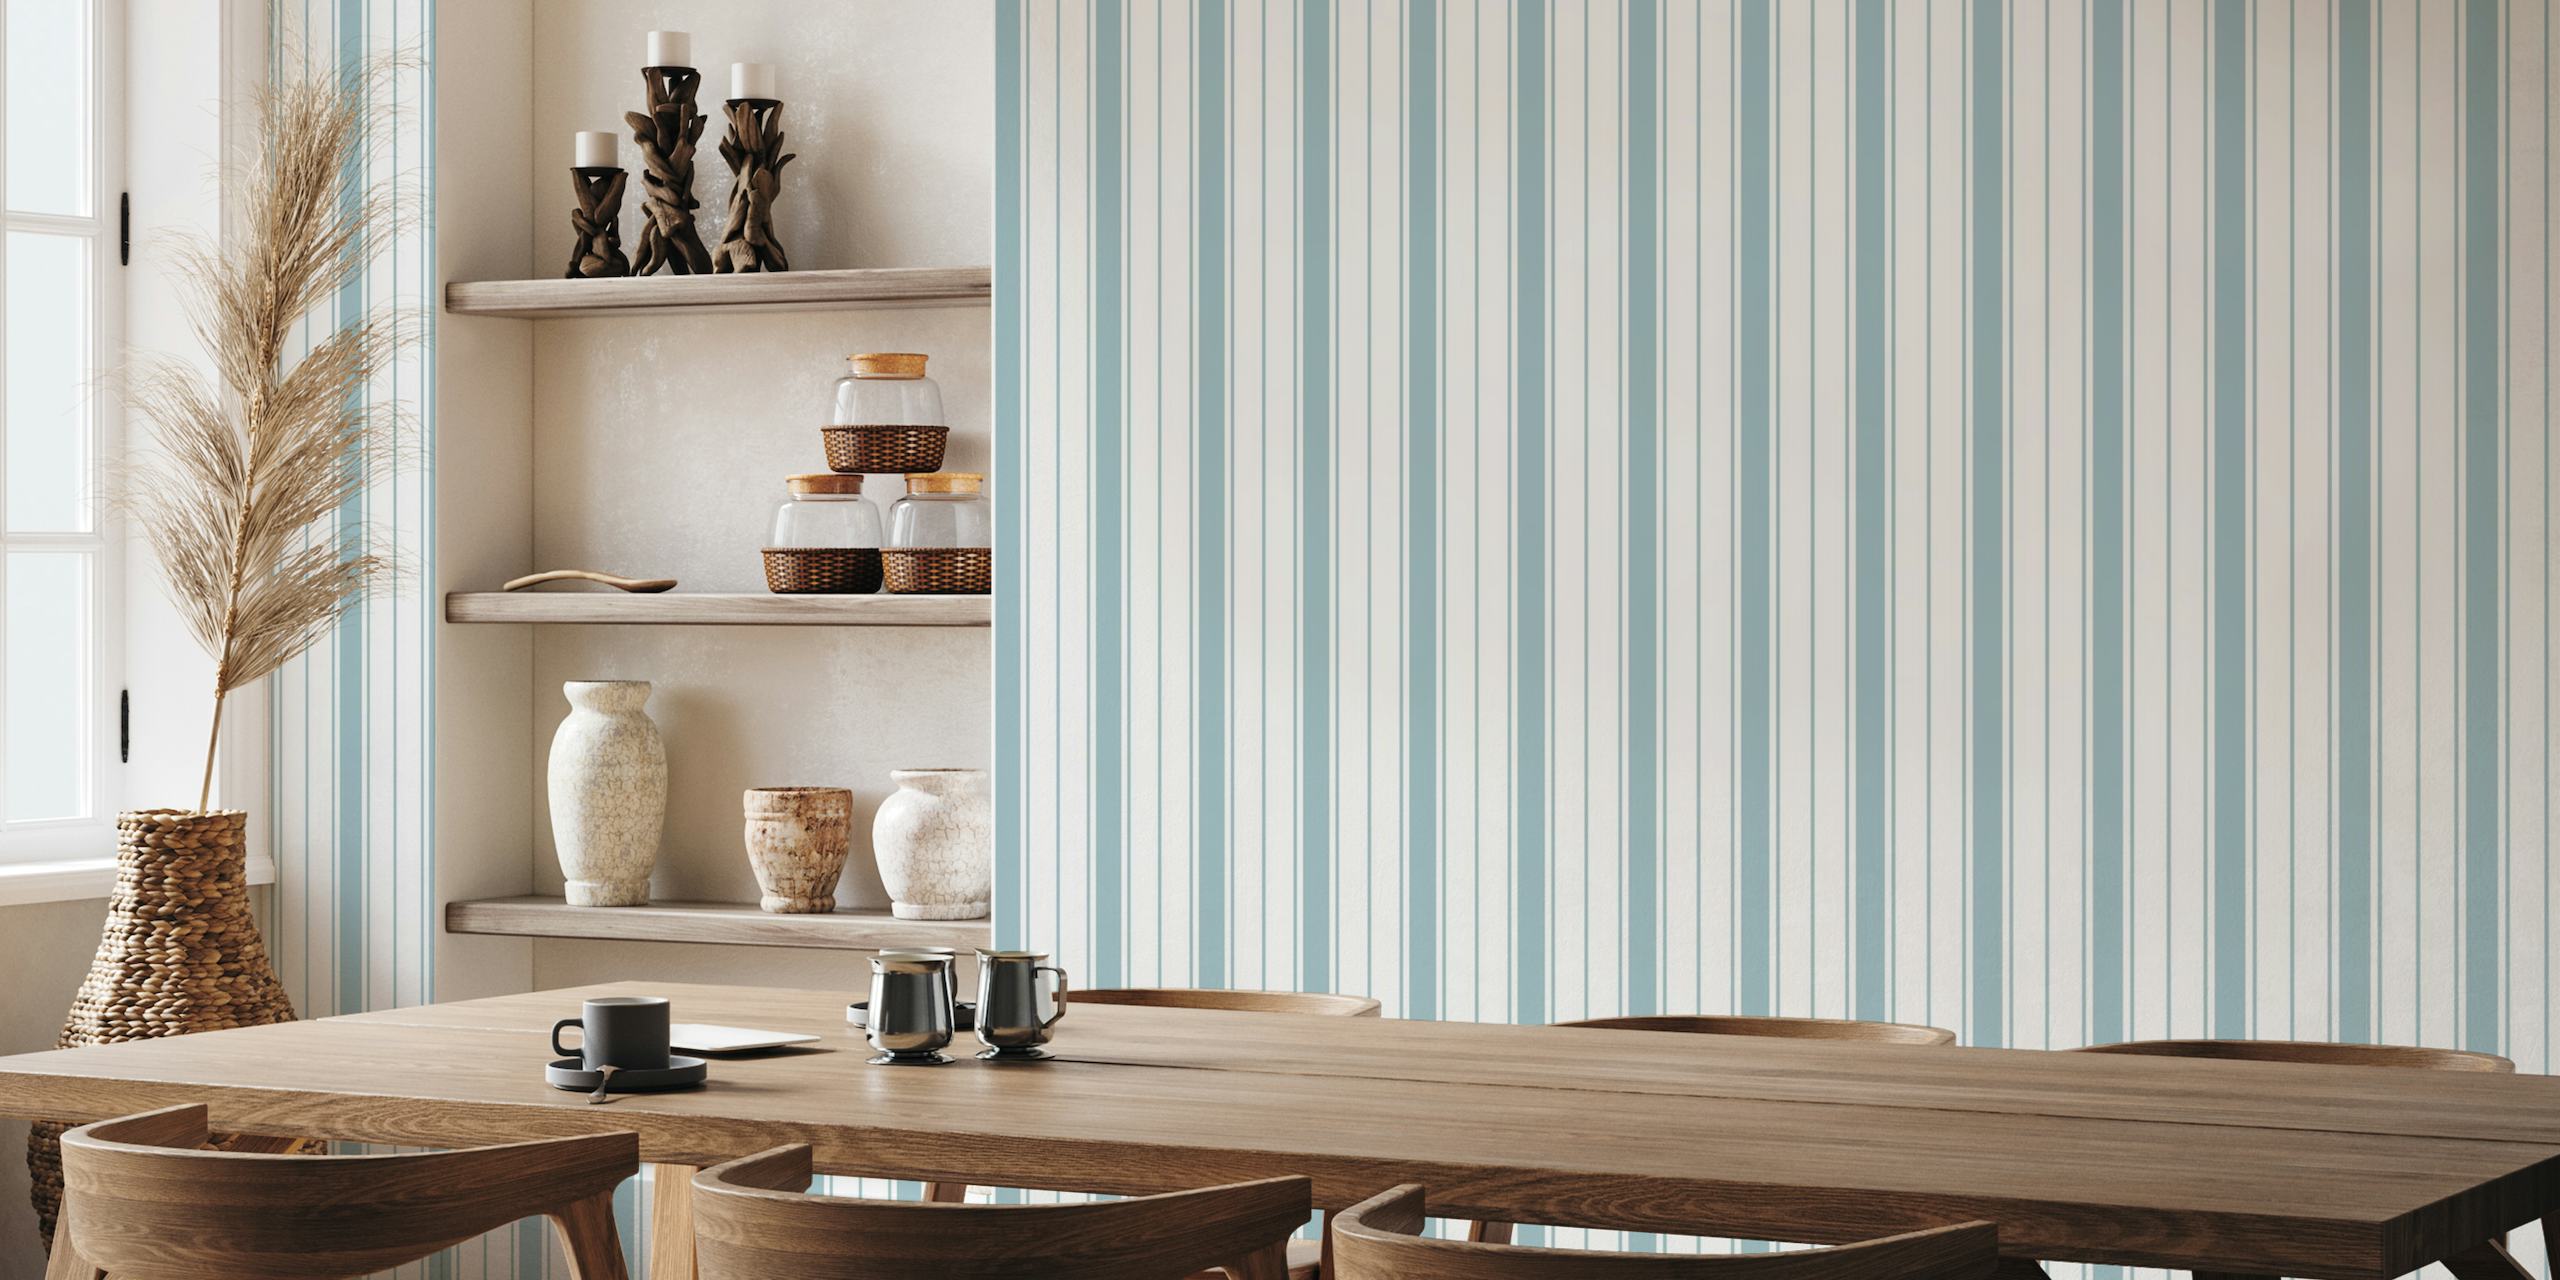 Coastal Stripes blue and white vertical striped wall mural for a calm, nautical-themed decor.